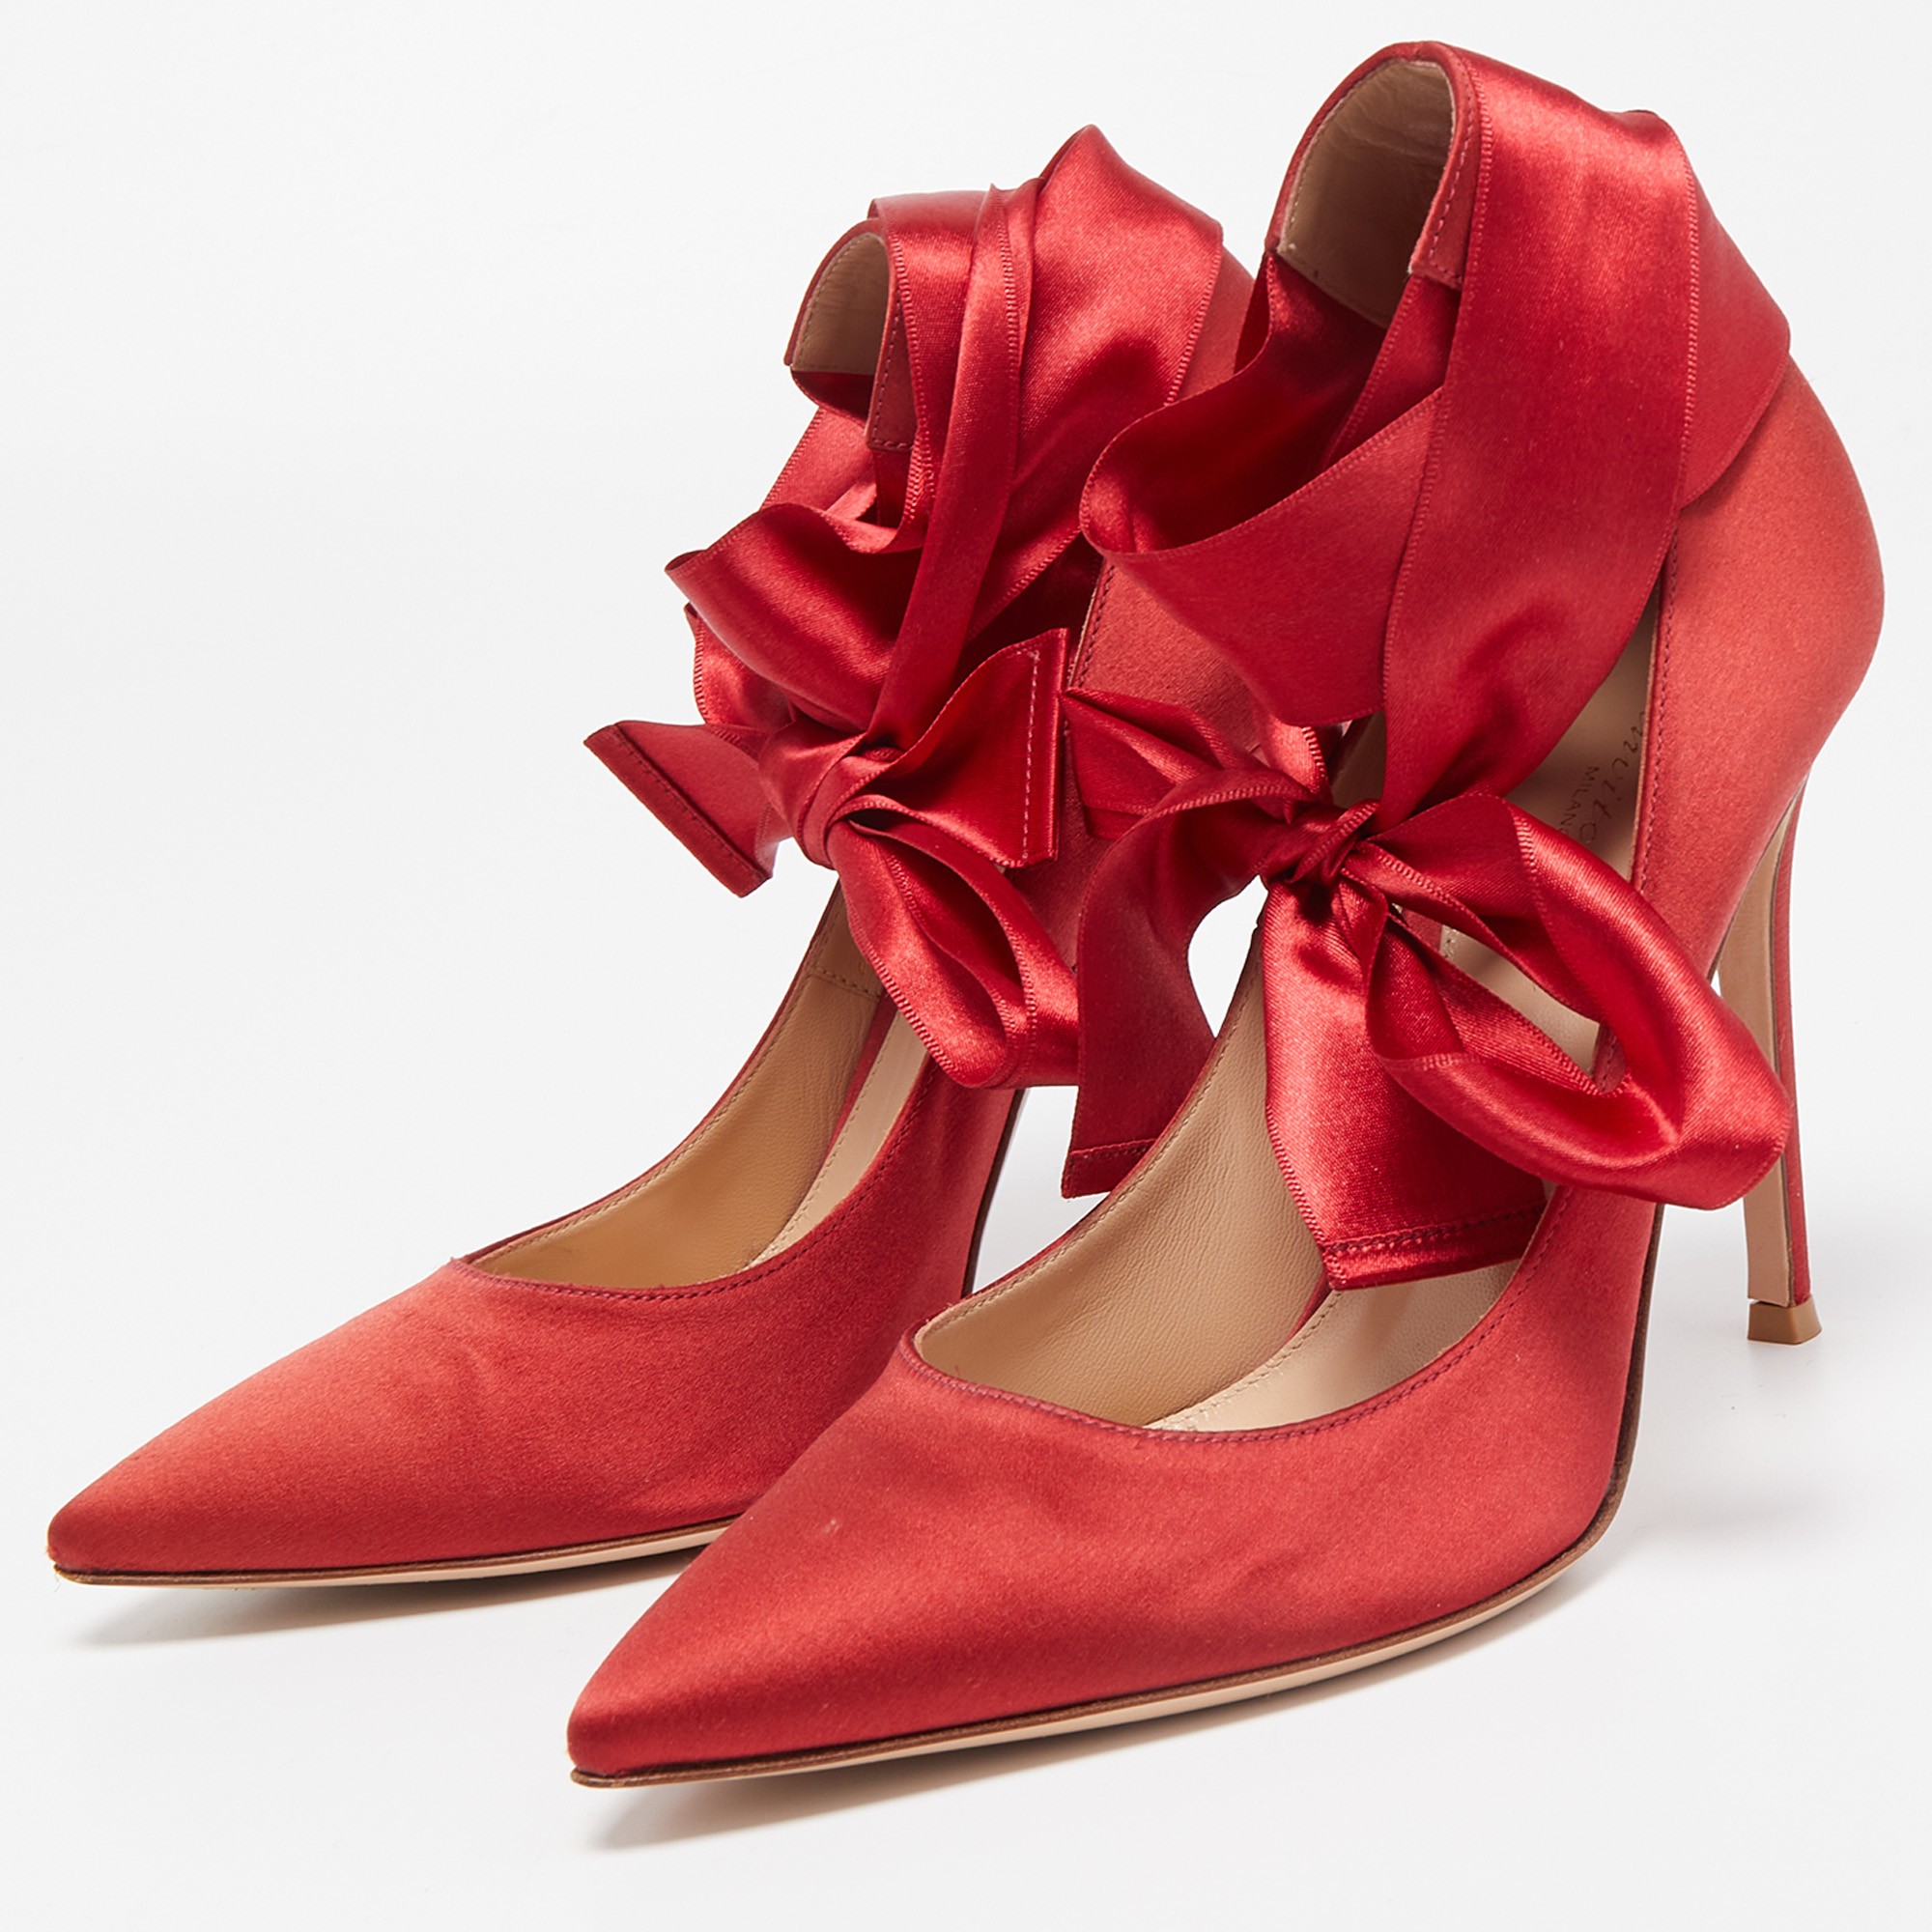 

Gianvito Rossi Red Satin Gala Ankle Tie Pumps Size